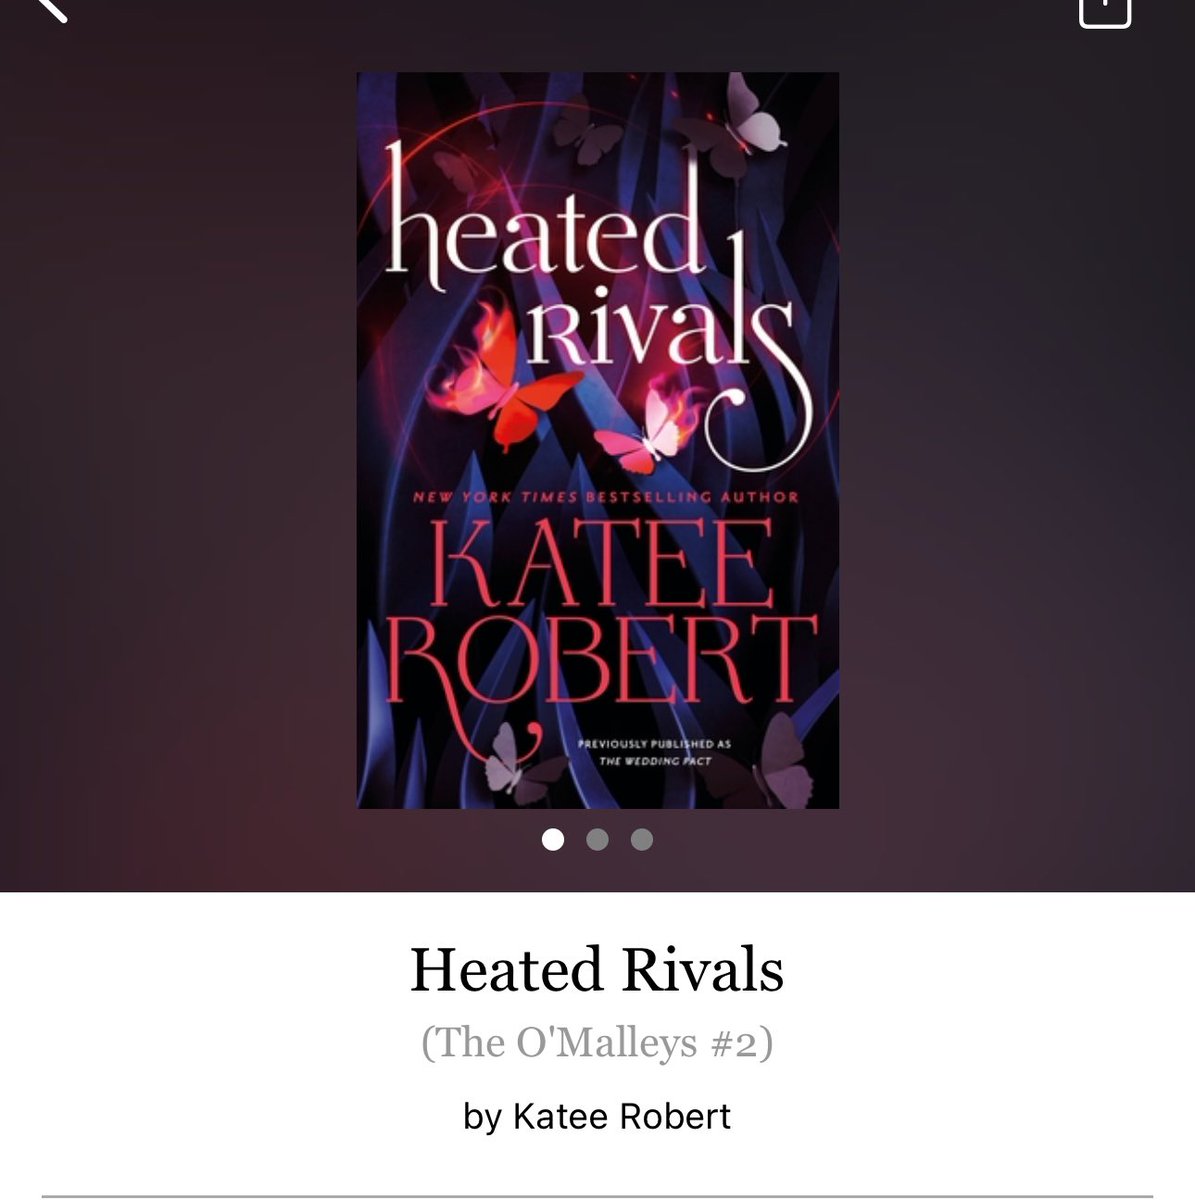 Heated Rivals by Katee Robert

#HeatedRivals by #KateeRobert #6071 #26chapters #320pages #220of400 #Series #Audiobook #96for24 #Book2 #8houraudiobook #TheOMalleys #TheWeddingPact #CarriganAndJames #february2024 #clearingoffreadingshelves #whatsnext #readitquick